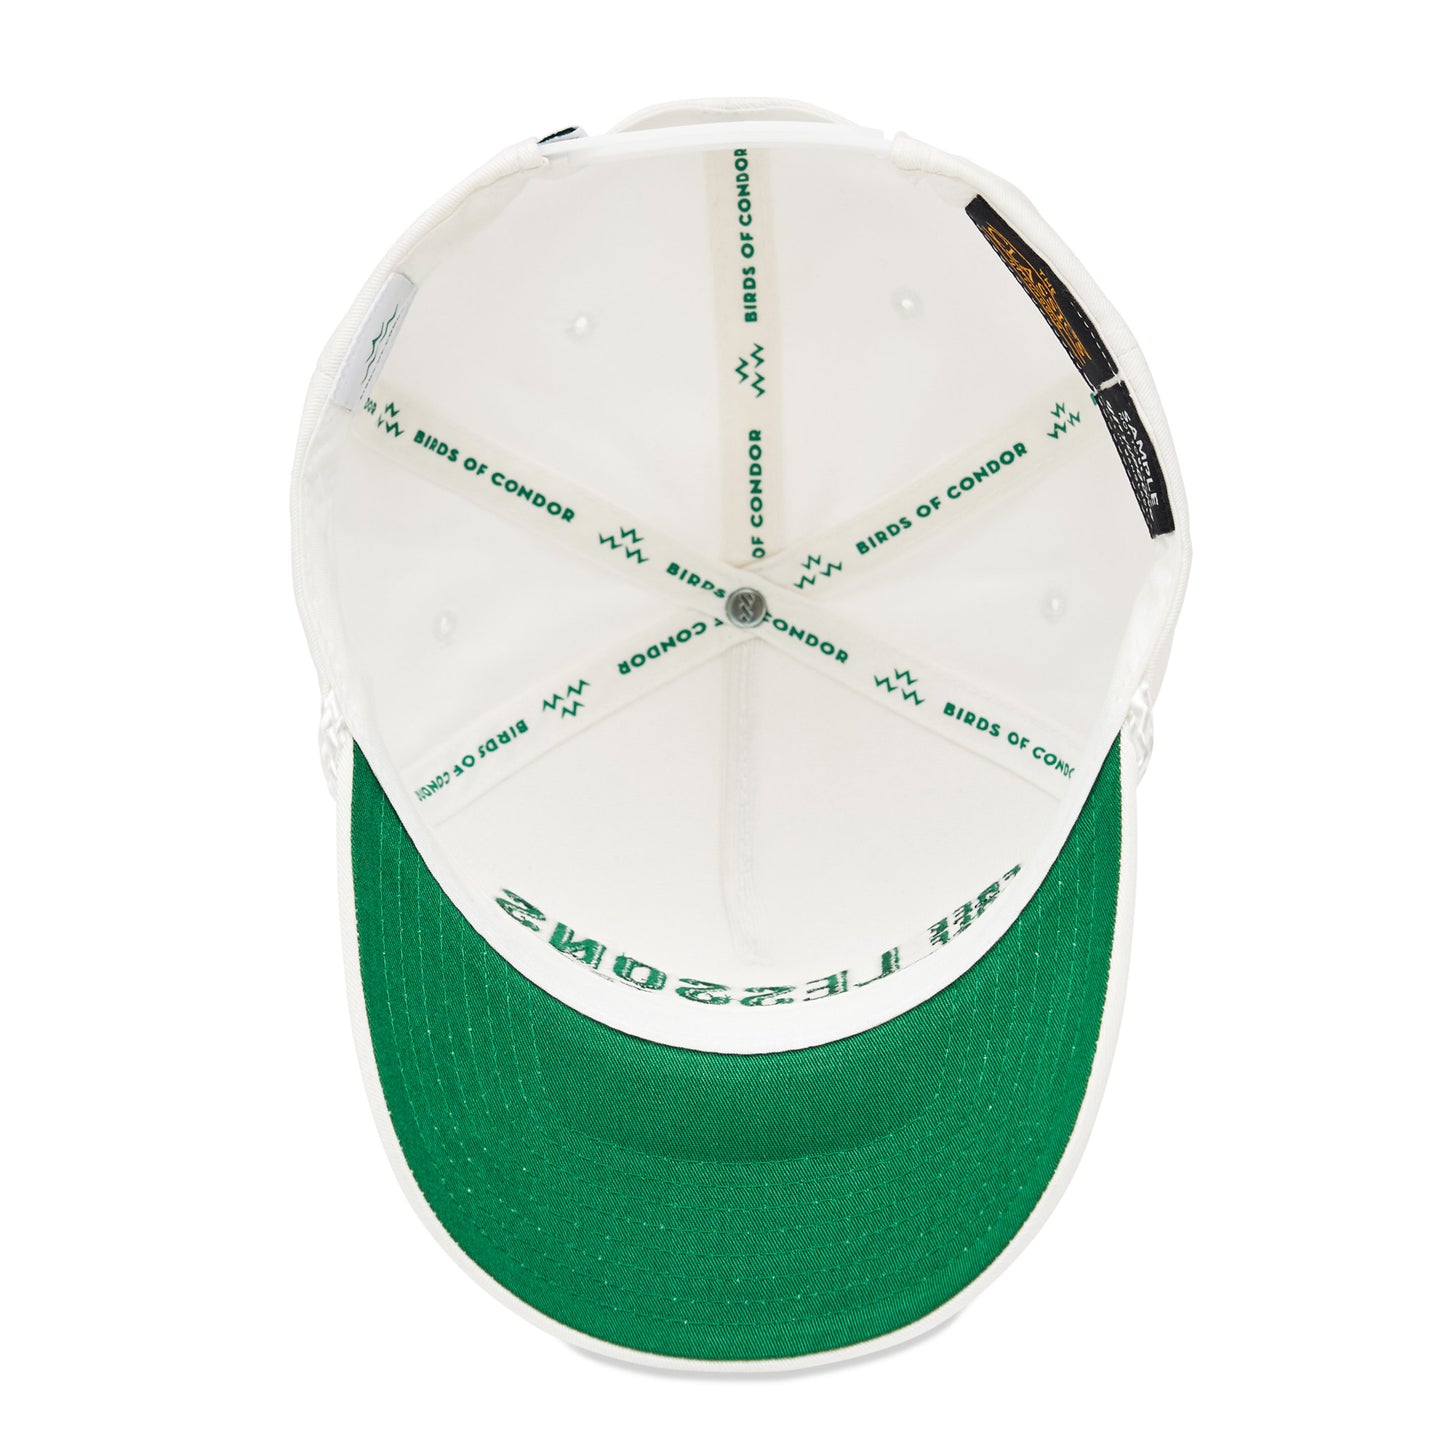 birds-of-condor-white-perry-pro-golf-lessons-snapback-a-frame-hat